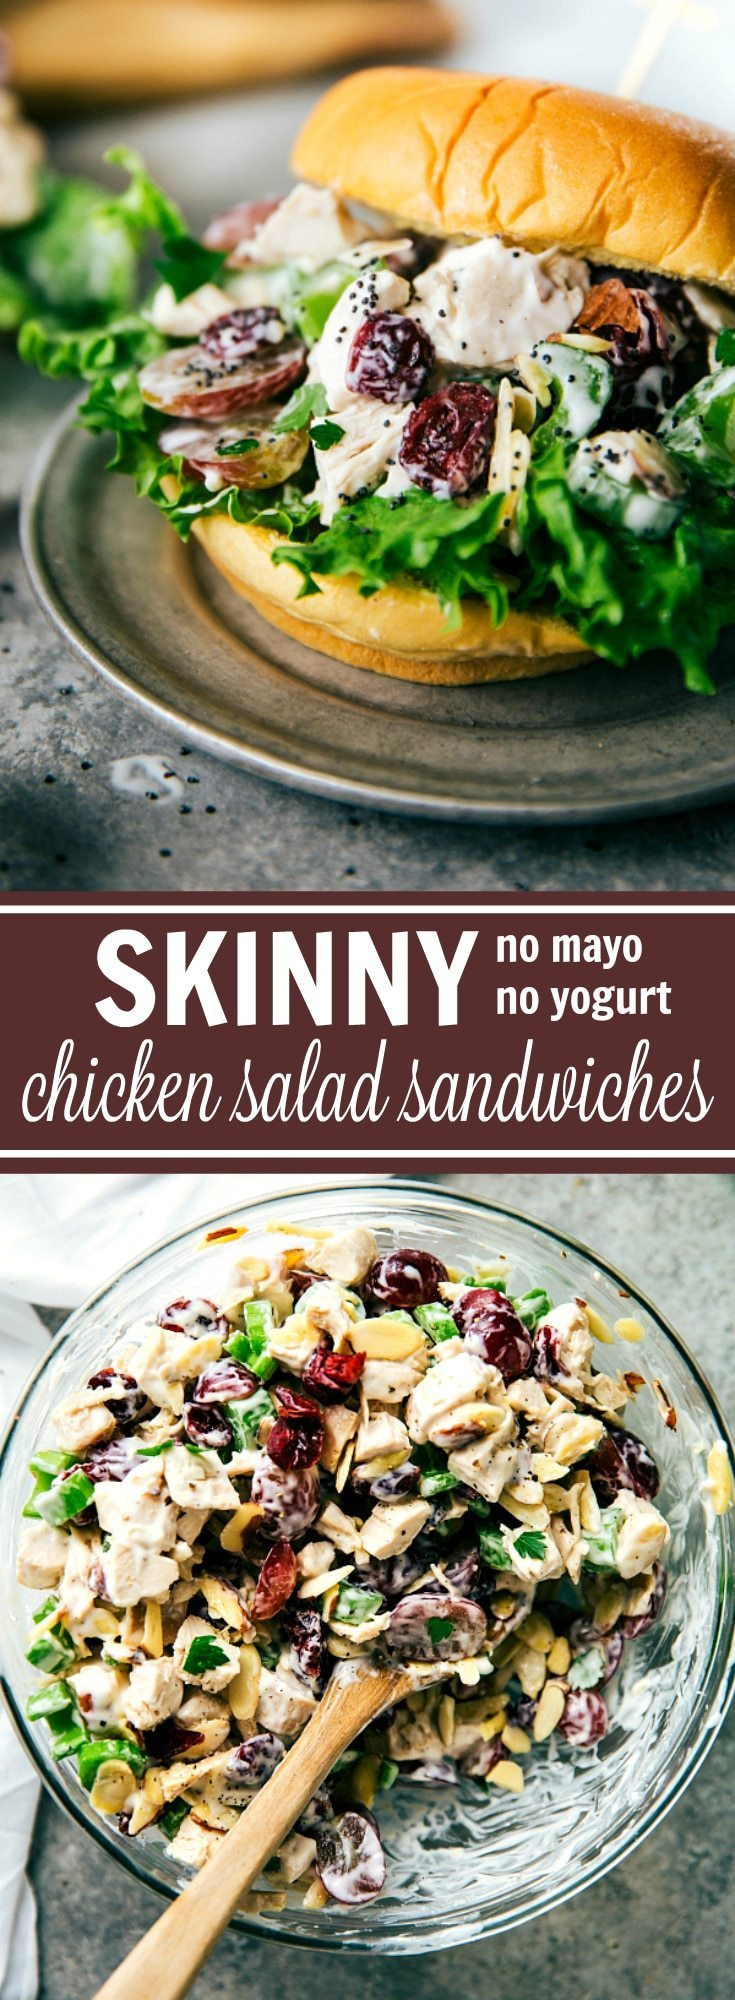 Low Calorie Chicken Salad Recipe
 Low Calorie Chicken Salad Sandwiches GIVEAWAY